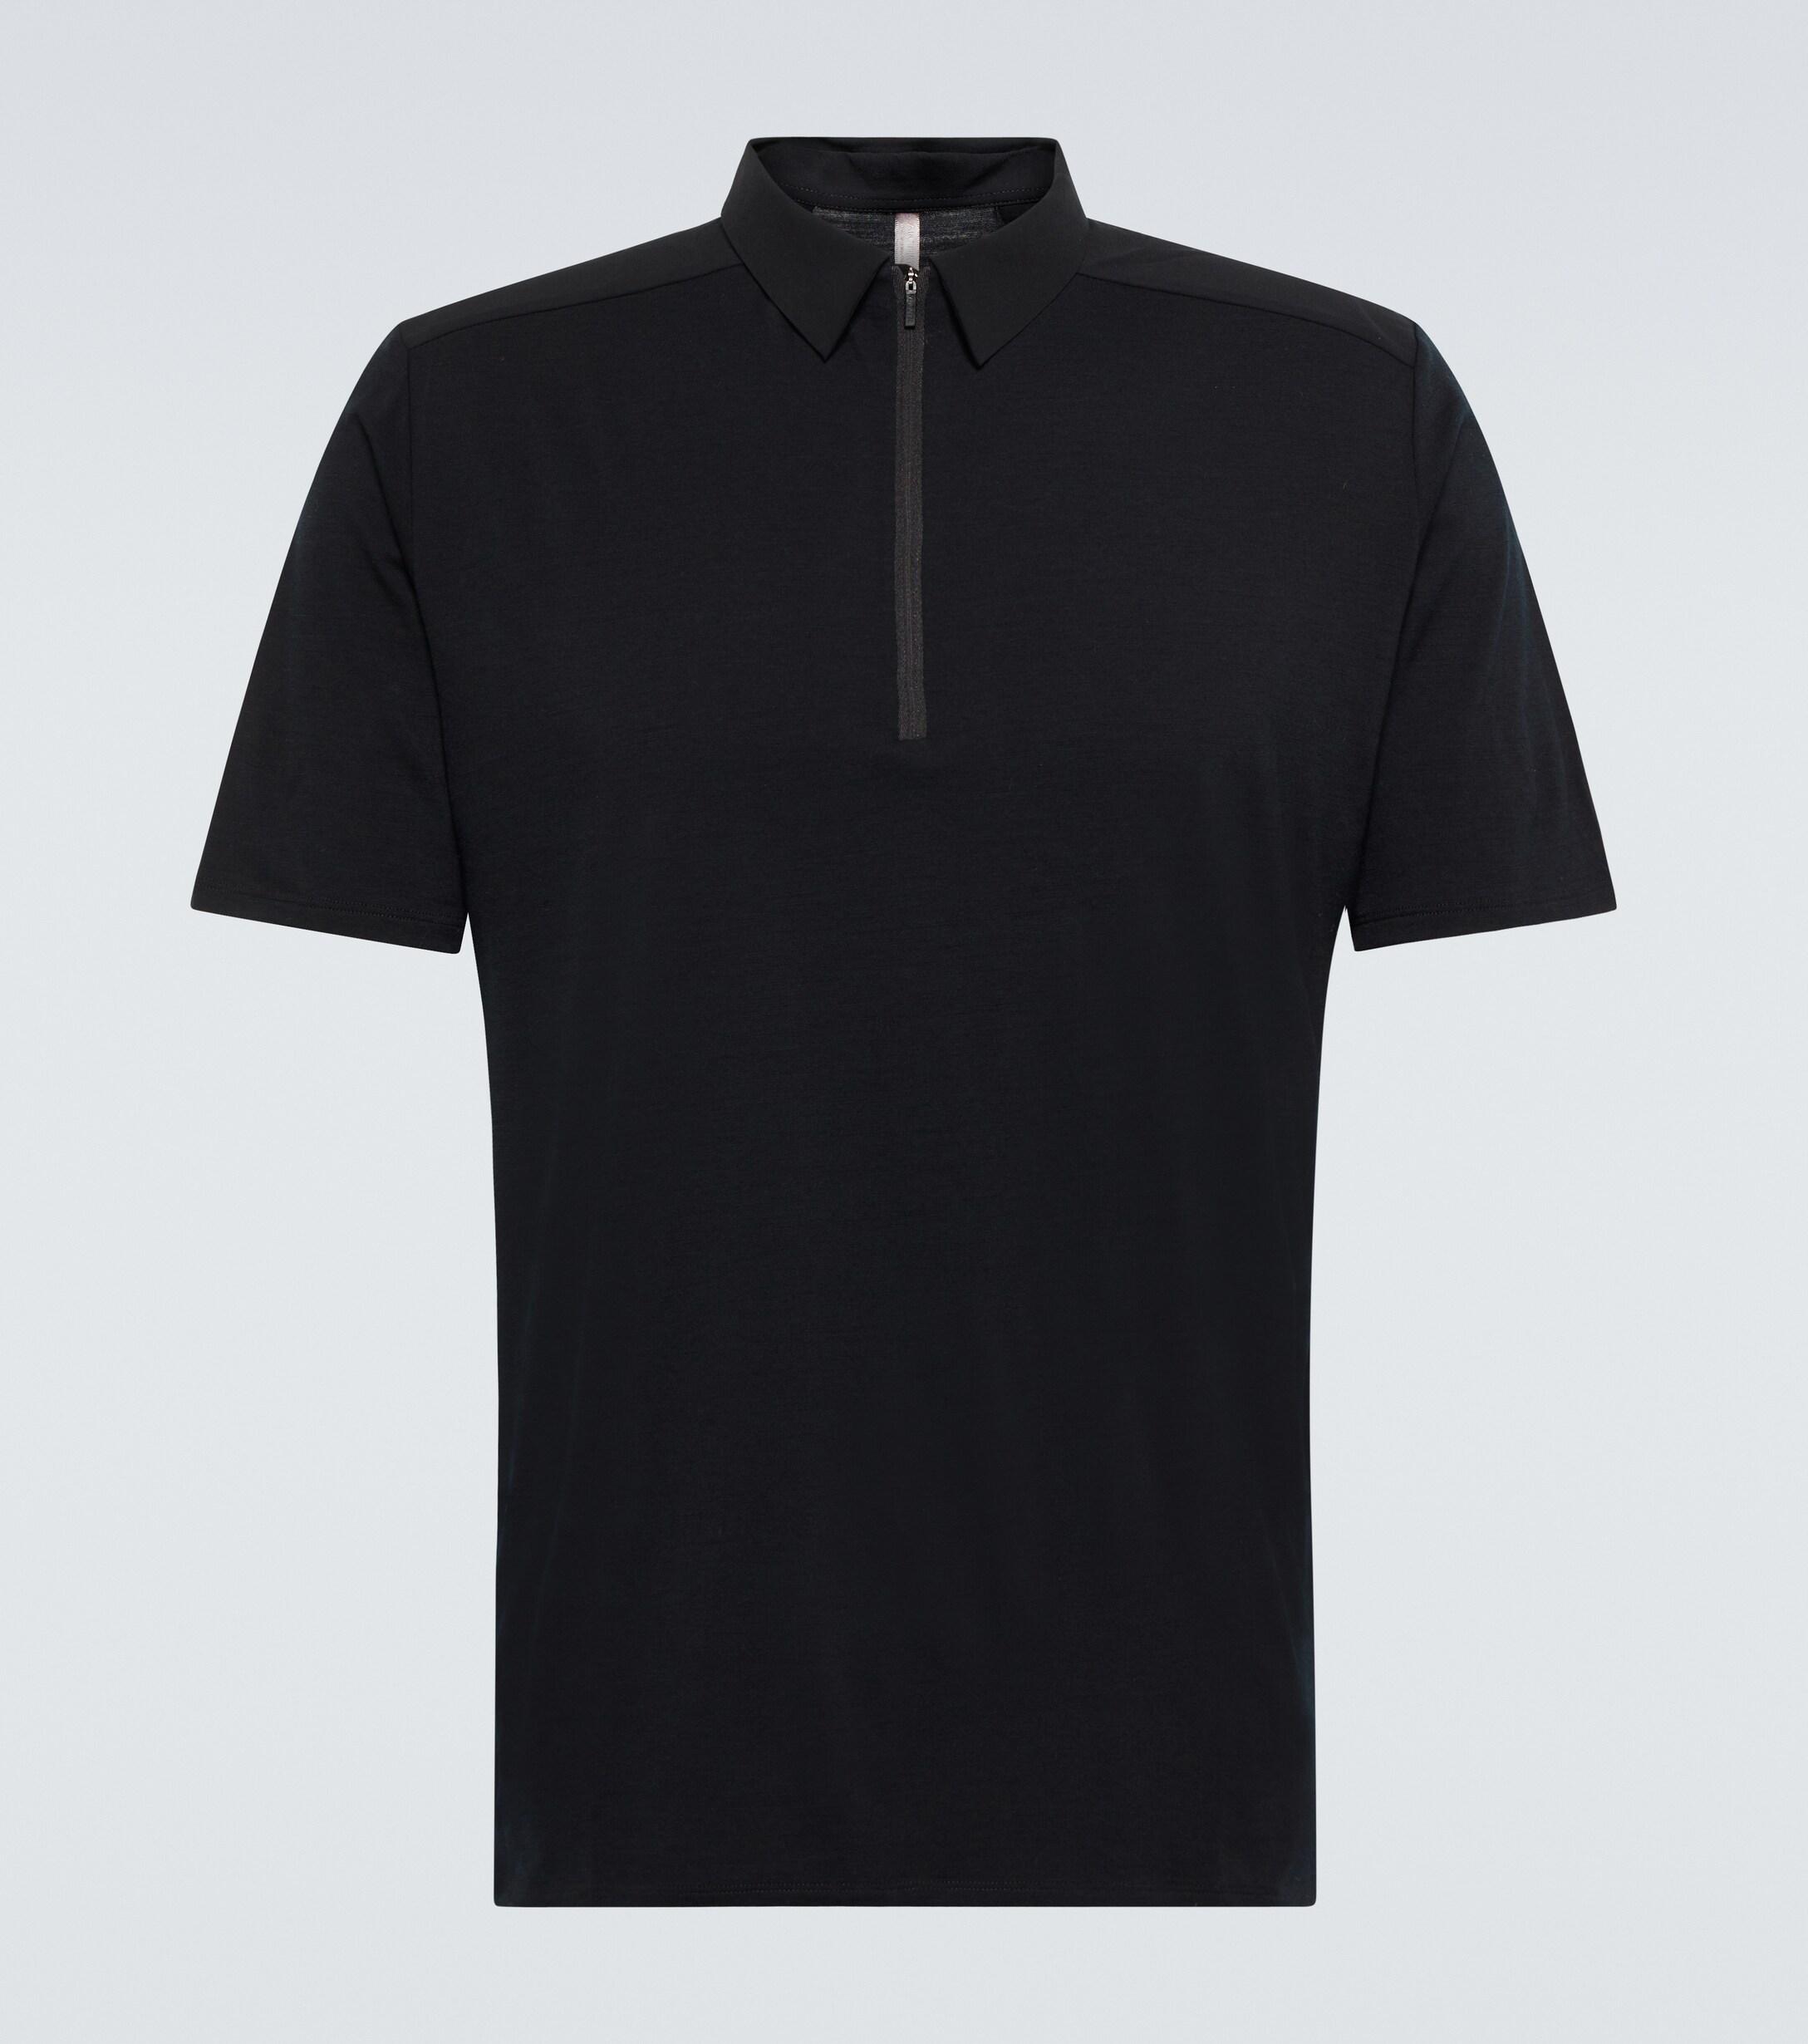 Veilance Frame Half-zipped Polo Shirt in Black for Men | Lyst Canada